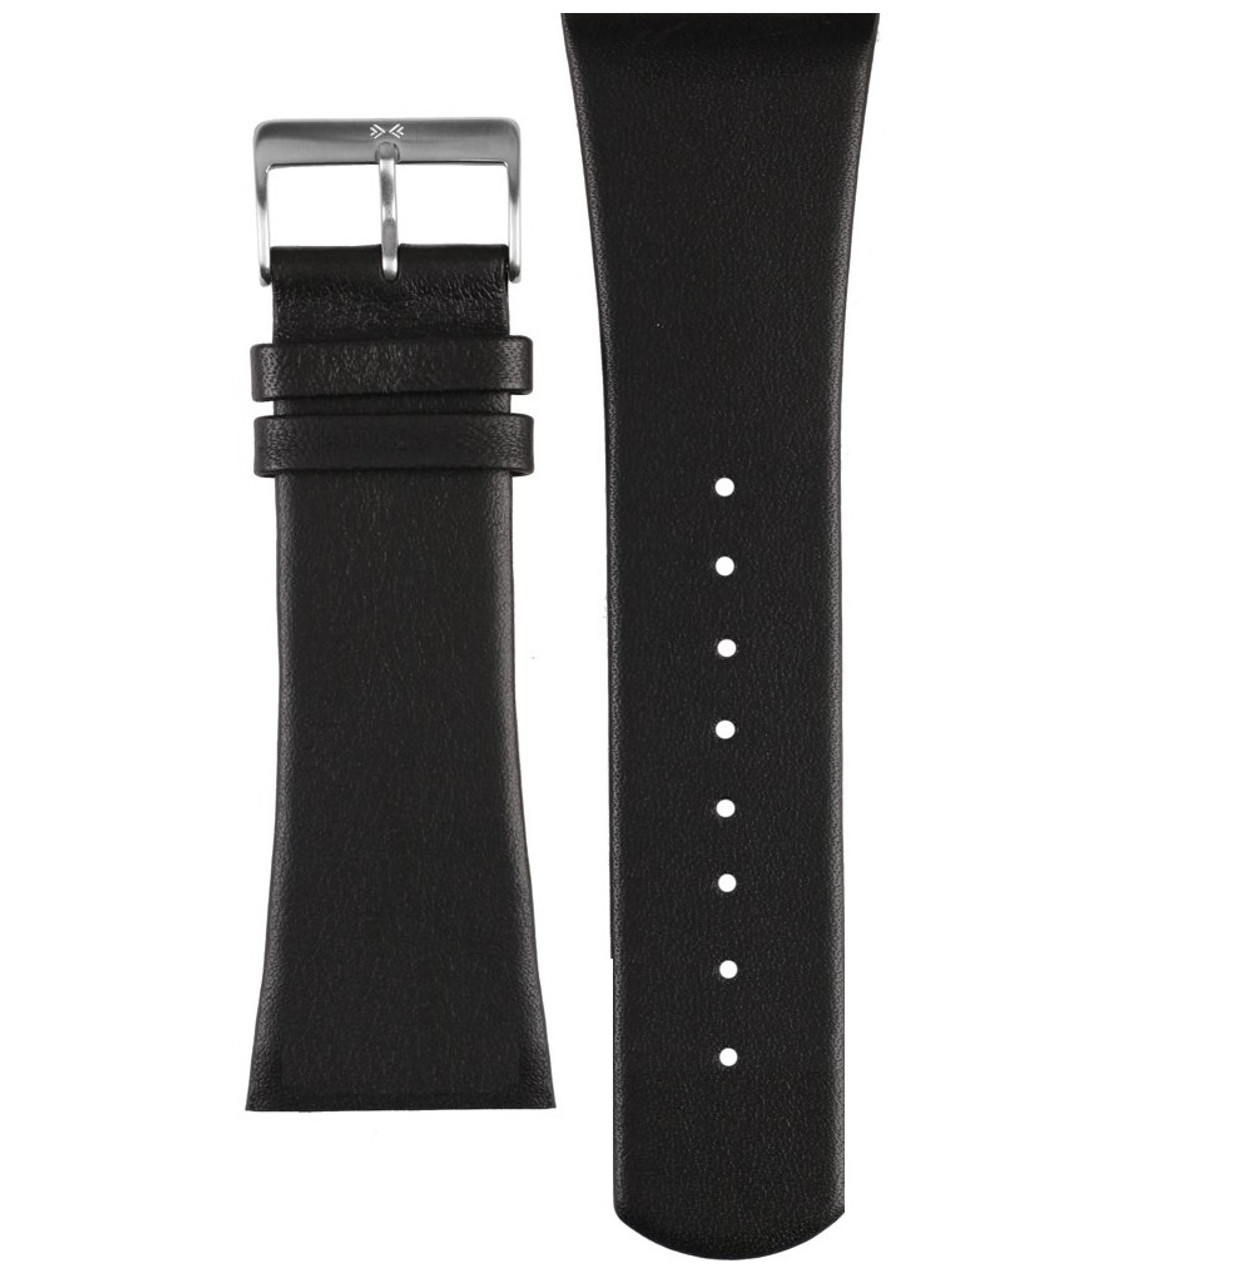 Skagen Replacement Black Leather Strap 28mm For SKW6070